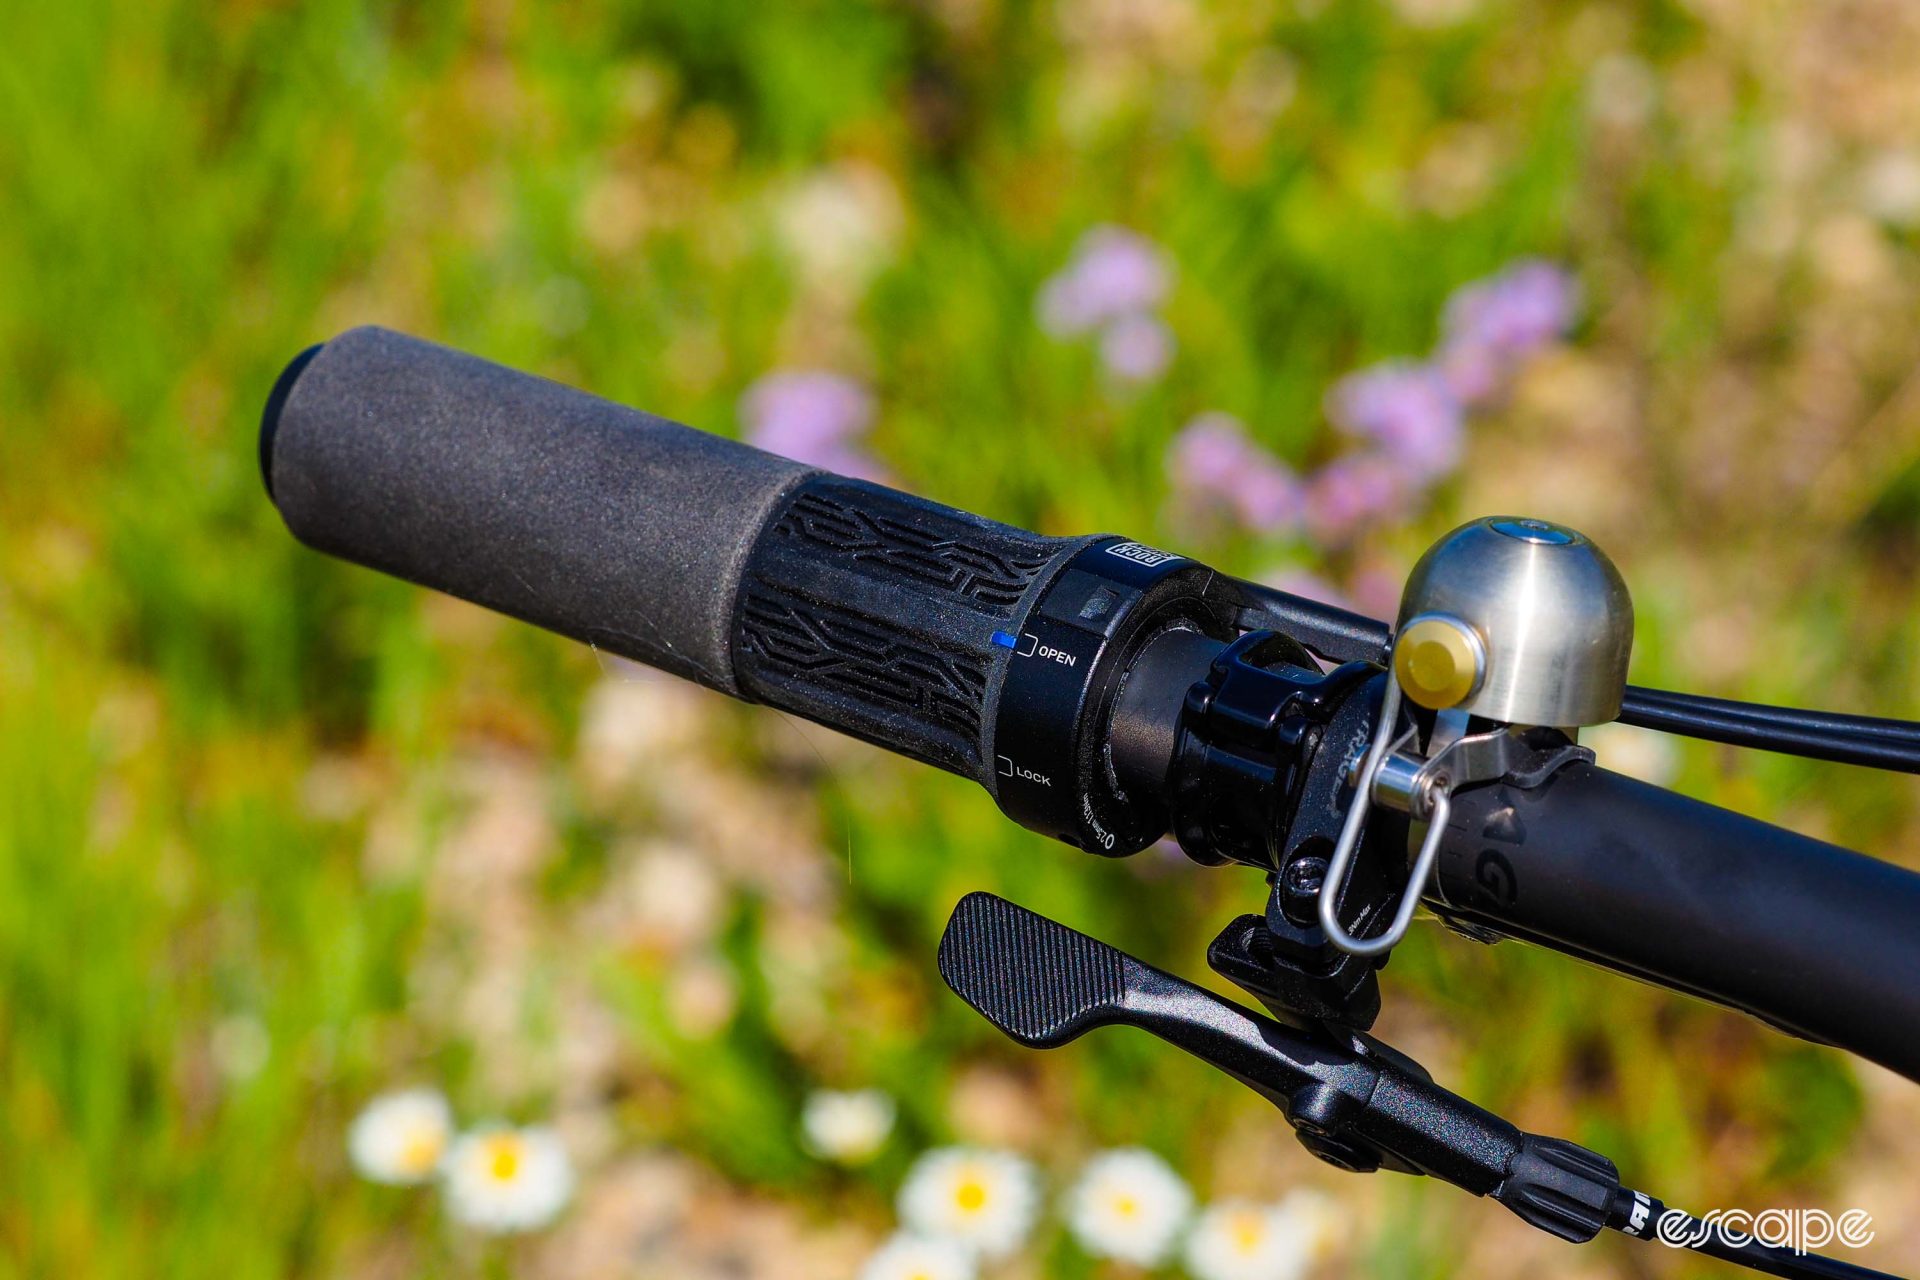 The left handlebar grip features a twist-shifter style dual lockout control just above a conventional dropper post remote. A silver Spurcycle bell - not included - completes the necessary items.